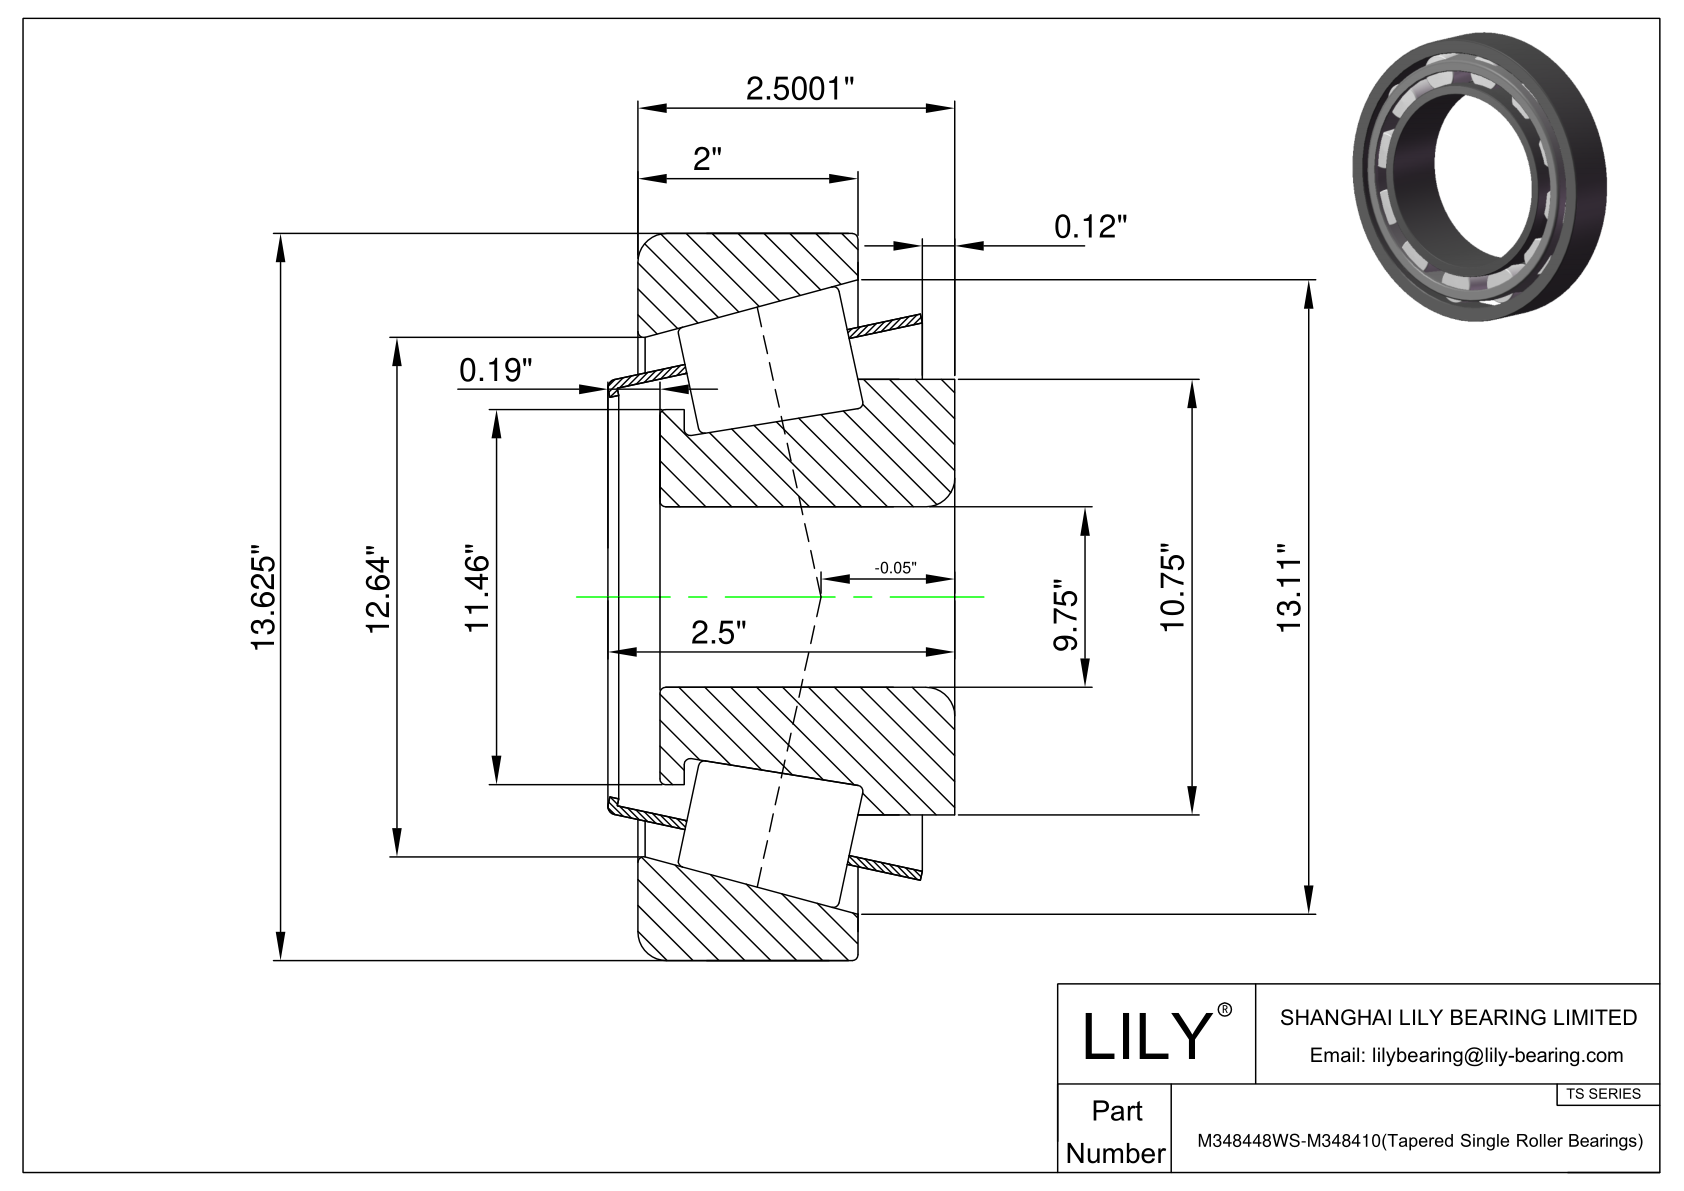 M348448WS-M348410 TS (Tapered Single Roller Bearings) (Imperial) cad drawing